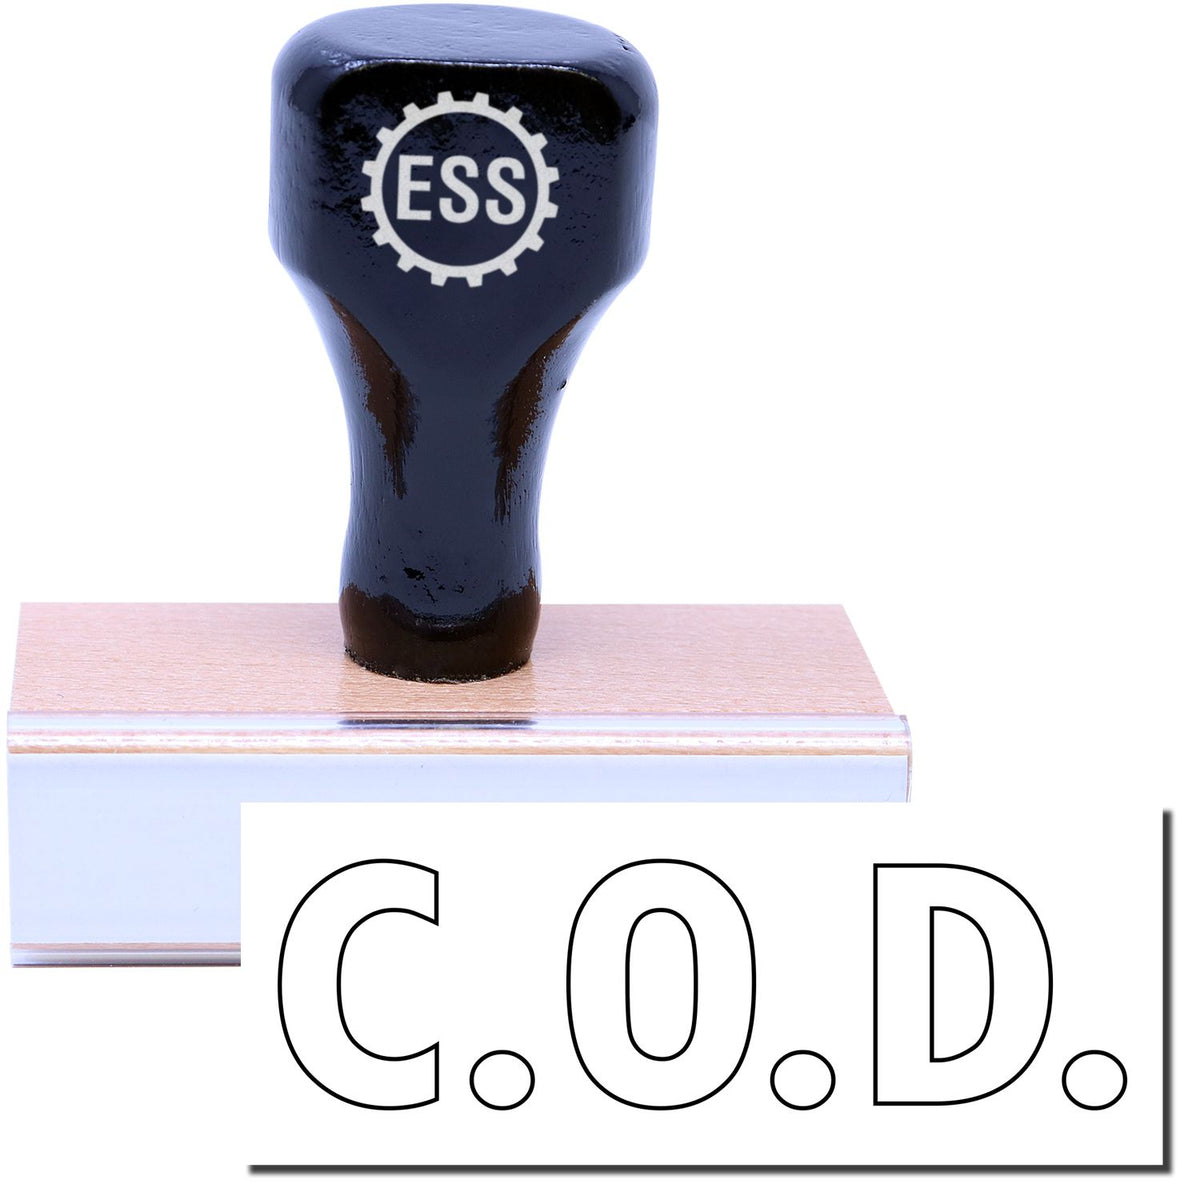 A stock office rubber stamp with a stamped image showing how the text &quot;C.O.D.&quot; in an outline font is displayed after stamping.